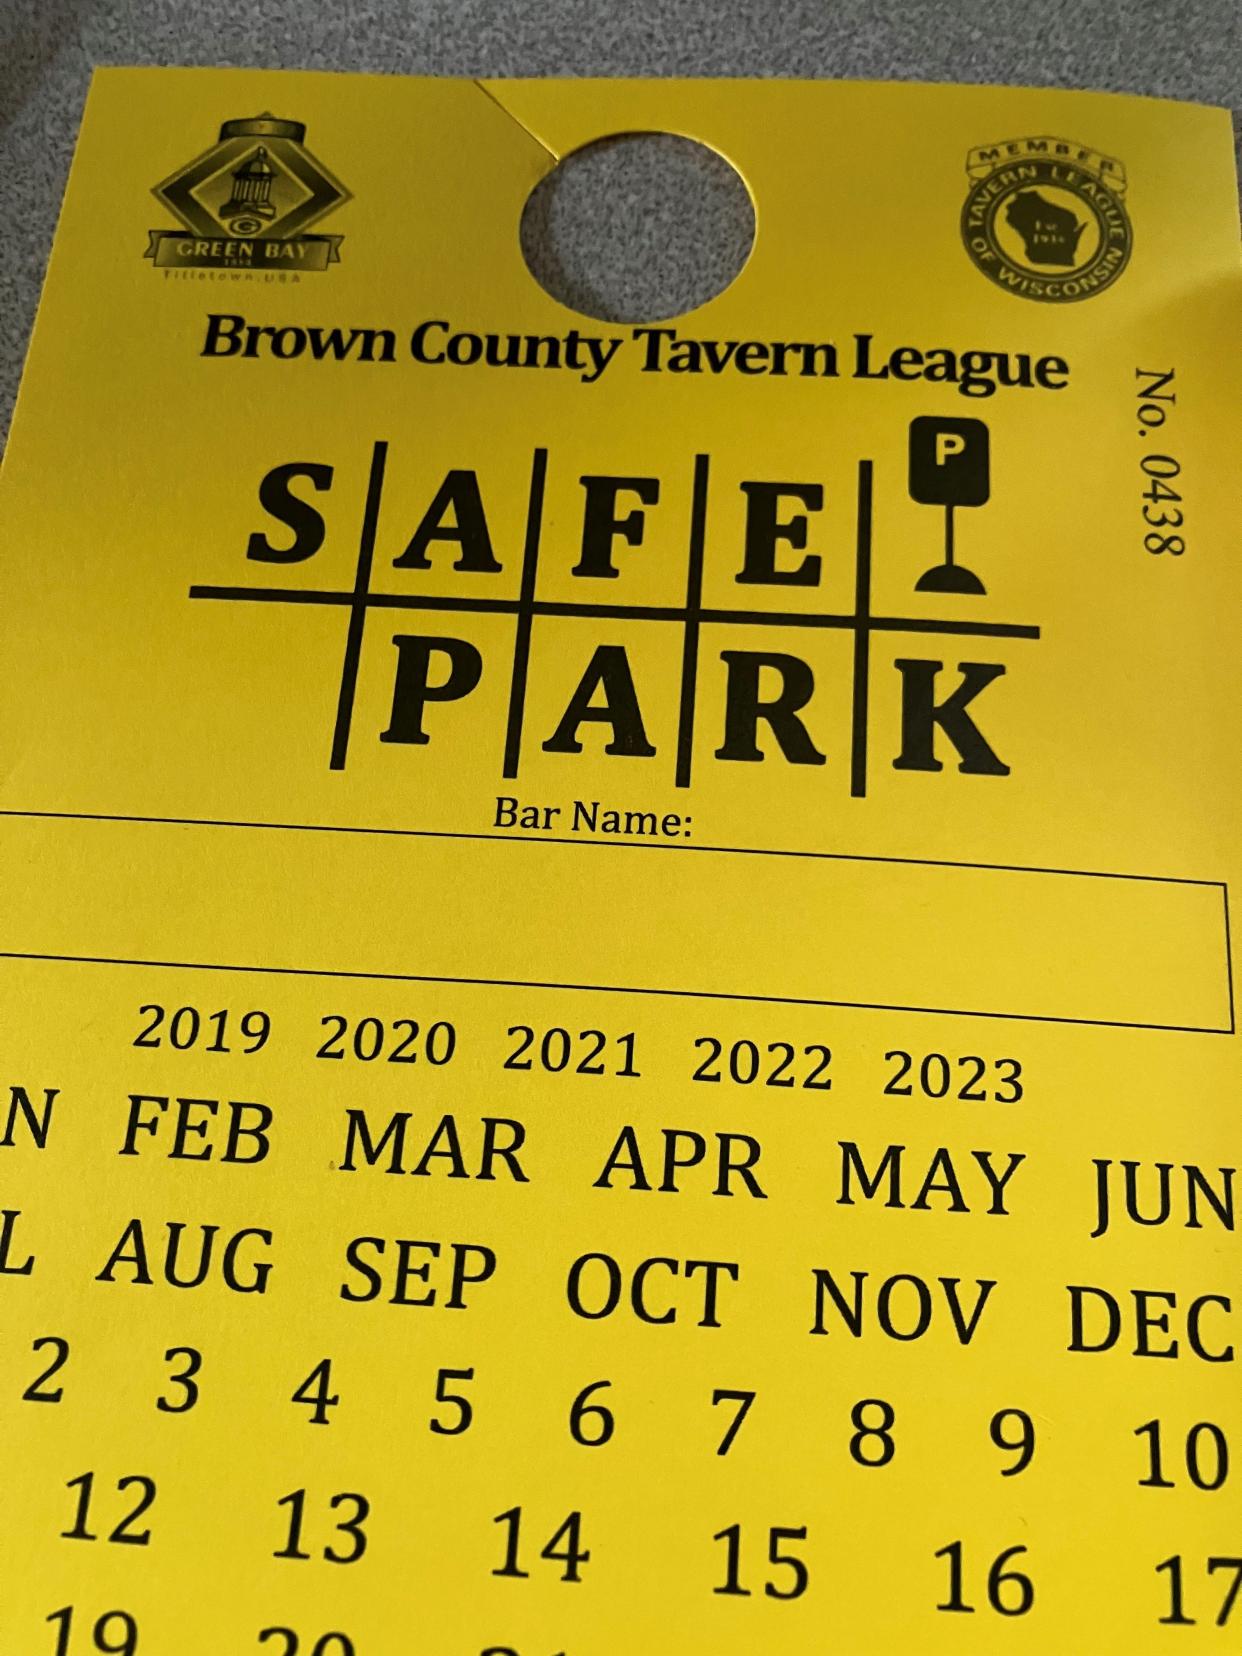 A SafePark tag Brown County Tavern League bars can provide to patrons who are unable to drive home. It's one effort the tavern league undertakes to keep people from driving intoxicated.